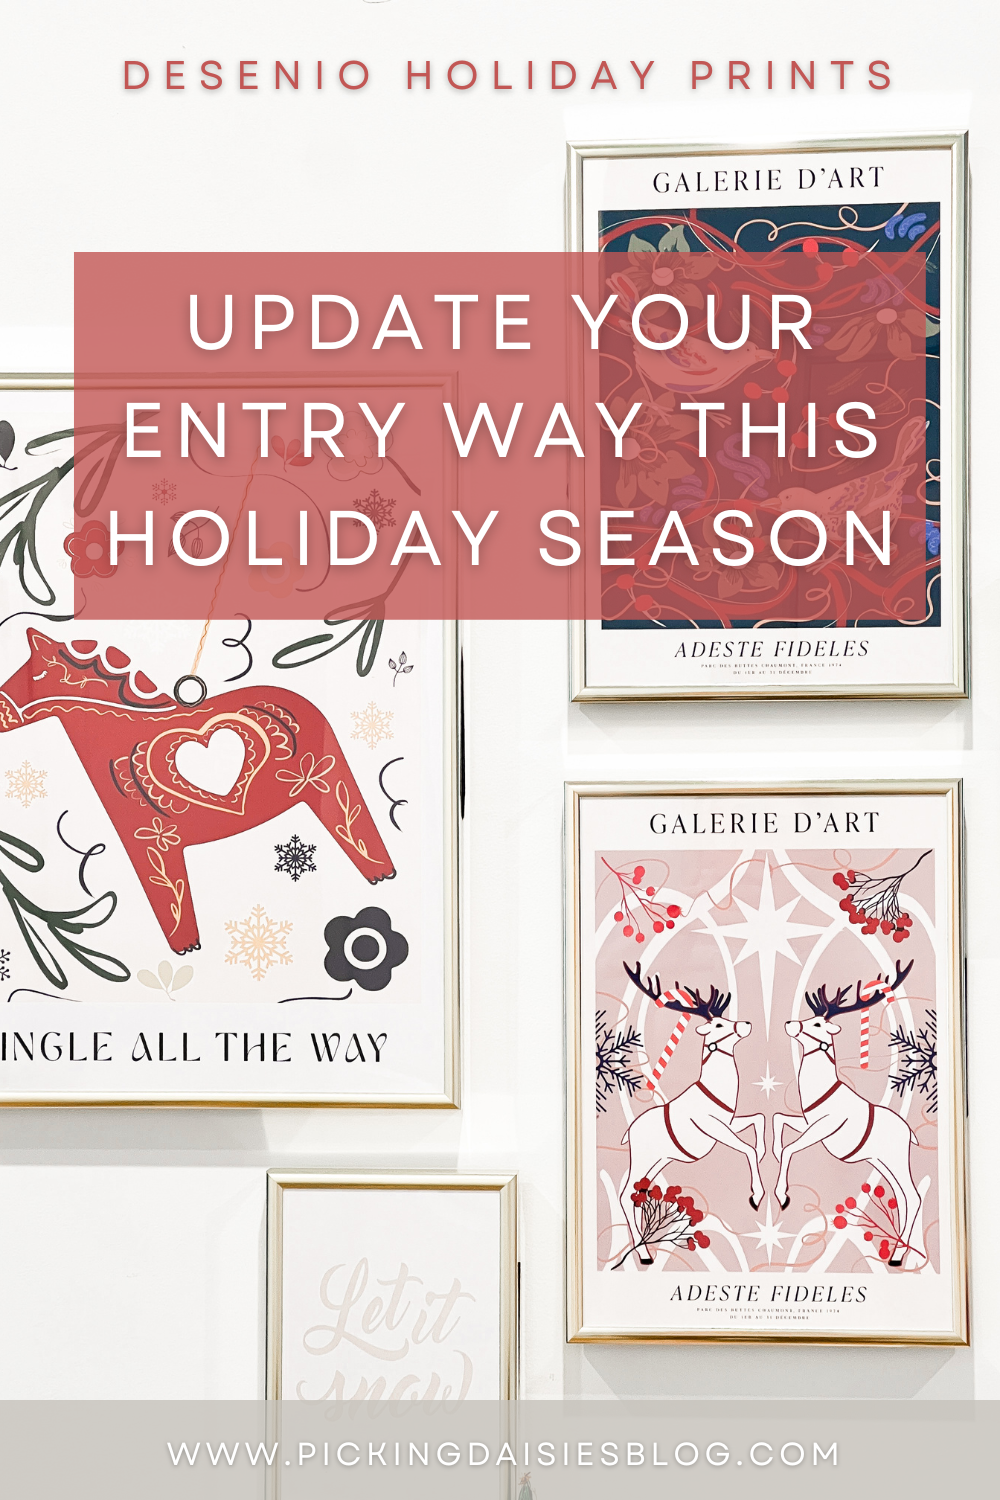 Creating a holiday gallery wall in your entryway can be a festive and delightful way to welcome the holiday season. With the help of Desenio prints and Command Strips for wall art, you can achieve a stunning transformation. Whether you're into festive entryway decor, looking for the perfect Desenio prints to adorn your wall, or seeking easy and damage-free installation methods like Command Strips, we've got you covered. From holiday home decorating and creating a seasonal gallery wall to offering creative holiday decor ideas and providing step-by-step guidance on wall art arrangement, this project is budget-friendly and hassle-free. You can also take advantage of a Desenio discount code to save on your holiday-themed prints. So, if you're ready to infuse some holiday ambiance into your space, check out our stunning collection of prints, from traditional red and green holiday decor to modern and creative designs. With Desenio and Command Strips, your entryway can undergo a magical holiday makeover. Don't miss out on the chance to transform your space and share your own entryway decorating hacks and transformations with others. Start your holiday gallery wall journey today and spread the Holiday gallery wall, Festive entryway decor, Desenio prints, Command Strips for wall art, Holiday home decorating, Entryway transformation, Holiday ambiance, Budget-friendly holiday decor, Seasonal gallery wall, Creative holiday decor ideas, Easy wall art installation, Desenio discount code, Stunning holiday prints, Red and green holiday decor, Command Strips guide, Decorating for the holidays, Festive interior design, Entryway makeover, Wall art arrangement tips, Command Strips for renters, Seasonal wall decor, Holiday spirit at home, Entryway inspiration, Festive color palette, Desenio gallery wall, Step-by-step wall art installation, Holiday-themed prints, Affordable holiday decor, Home decor for the holidays, Transforming your space for the holidays, Entryway decor ideas, Seasonal decorating with prints, Command Strips how-to, Welcoming holiday atmosphere, Entryway holiday makeover, DIY holiday gallery wall, Desenio art prints, Holiday home design, Entryway statement wall, Holiday decoration inspiration, Choosing holiday wall art, Decorate with Desenio, Hassle-free holiday decor, Creative wall art arrangement, Command Strips decorating, Seasonal color schemes, Festive interior ideas, Entryway decor transformation, Holiday-themed artwork, Desenio holiday collection, Entryway decor with prints, Command Strips for holiday decorating, Holiday decorating on a budget, Entryway holiday magic, Seasonal art prints, Holiday color coordination, Affordable wall art, Entryway design tips, Holiday gallery wall inspiration, Desenio art for the holidays, Entryway decor without nails, Holiday home improvement, Seasonal decor arrangements, Command Strips for artwork, Festive home entrance, Entryway decor DIY, Holiday gallery wall goals, Creative holiday home decor, Entryway design ideas, Wall art planning, Holiday decor for renters, Entryway art arrangement, Holiday gallery wall trends, Desenio holiday prints, Entryway wall art ideas, Command Strips tutorial, Seasonal entryway makeover, Holiday color scheme inspiration, Budget-friendly wall decor, Entryway revamp, Seasonal wall art ideas, Holiday home inspiration, Entryway decor with a discount, Holiday decor themes, Creative Desenio prints, Entryway decorating hacks, Festive wall decor, Holiday decorating tips, Entryway statement piece, Seasonal entryway design, Command Strips for holiday wall art, Holiday art collection, Entryway decor for all, Wall art arrangement inspiration, Desenio holiday sale, Entryway decor without drilling, Holiday gallery wall trends, Entryway transformation before and after, Seasonal home design, Command Strips for damage-free decor.festive spirit! 